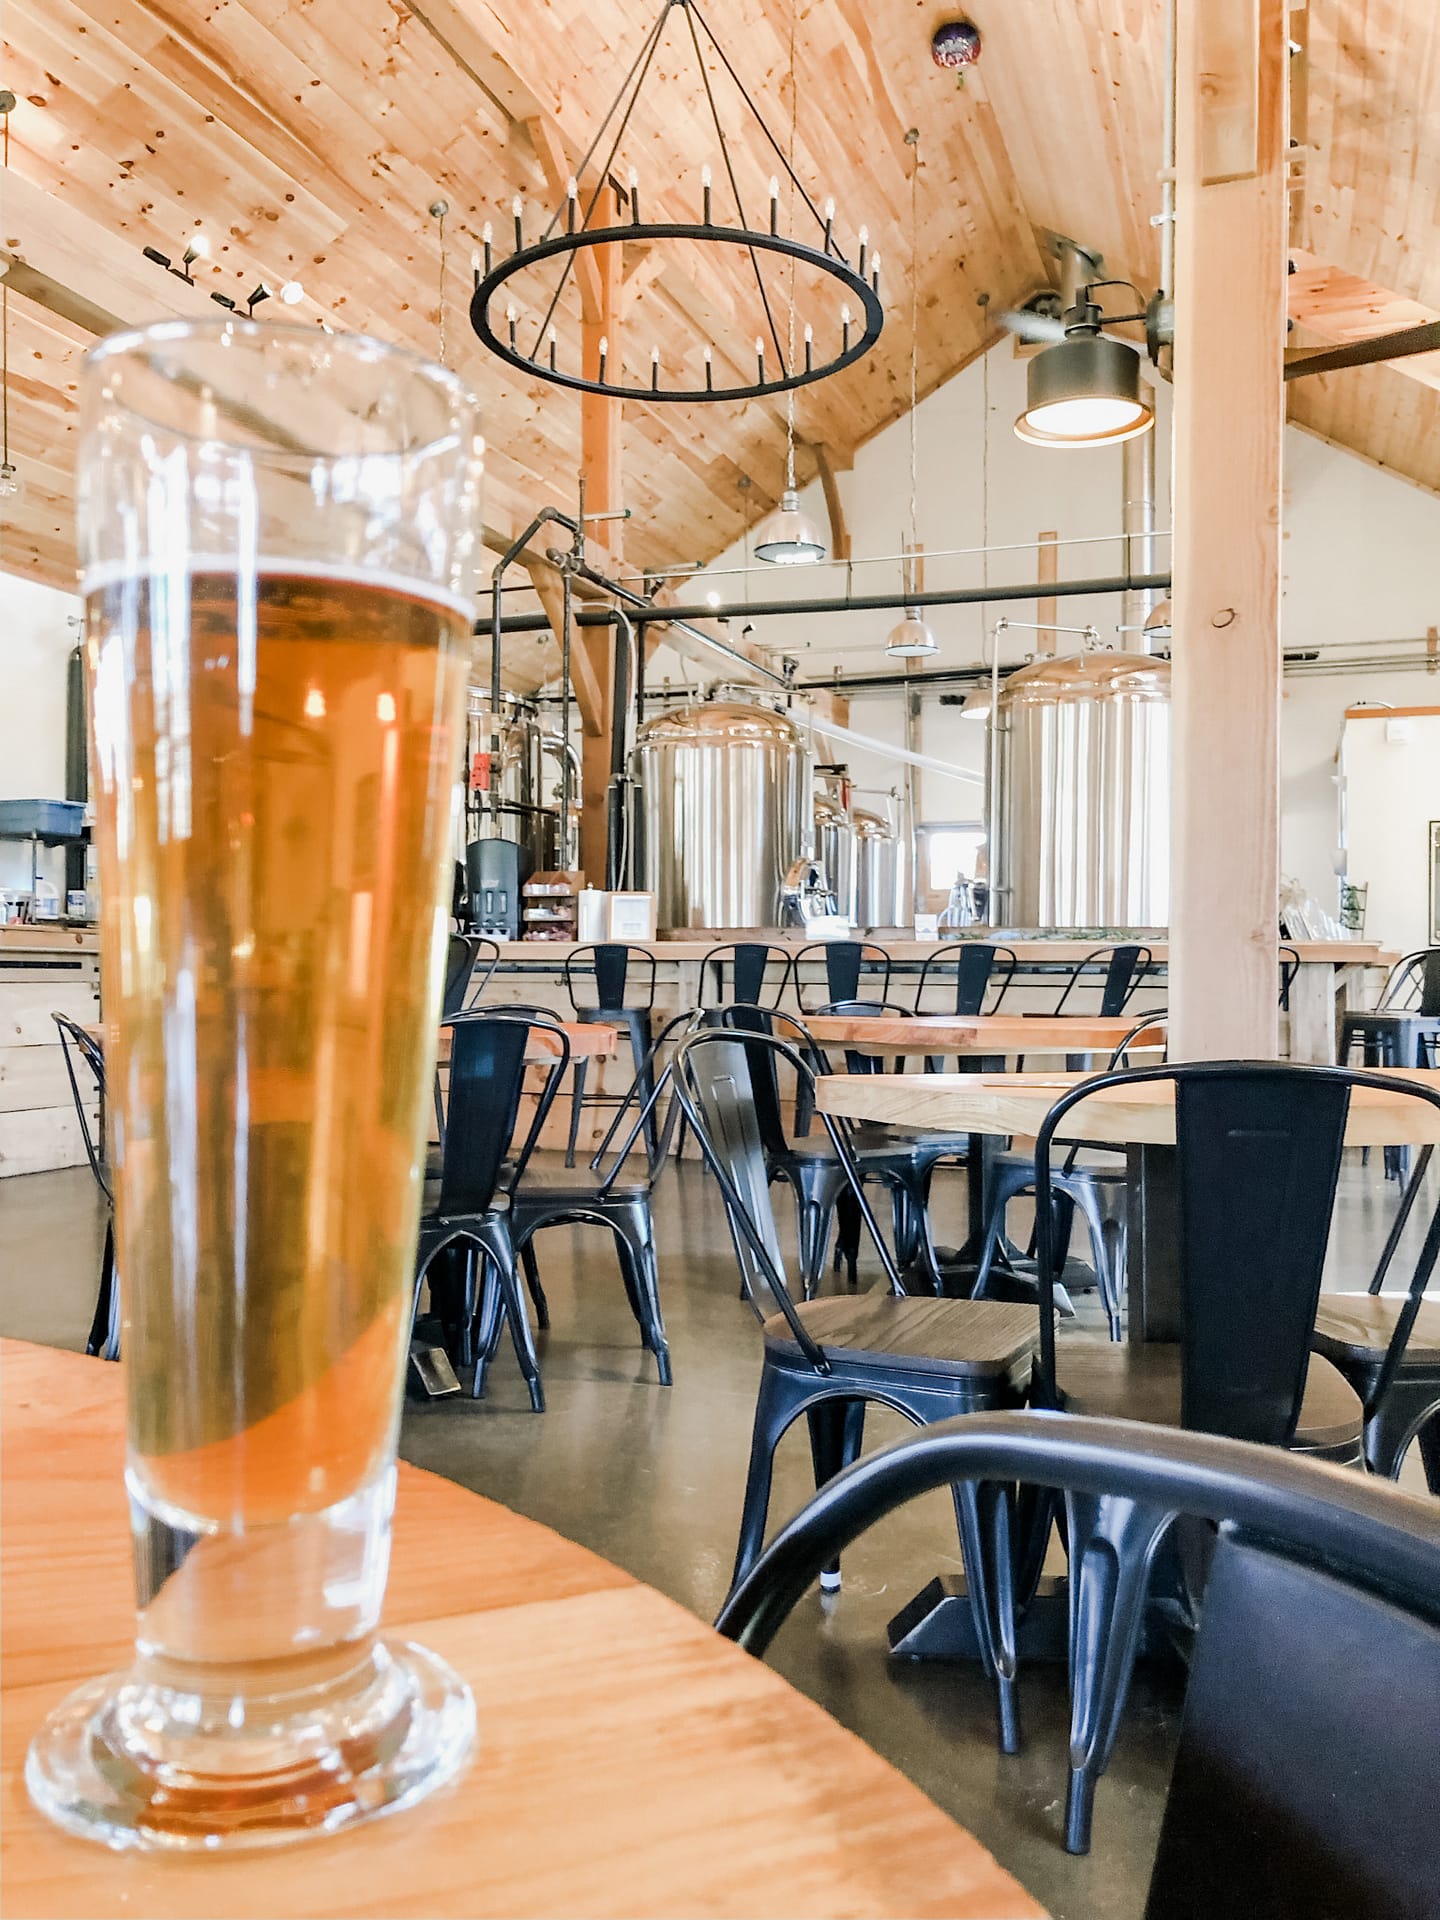 Glass of beer with interior of taproom in background